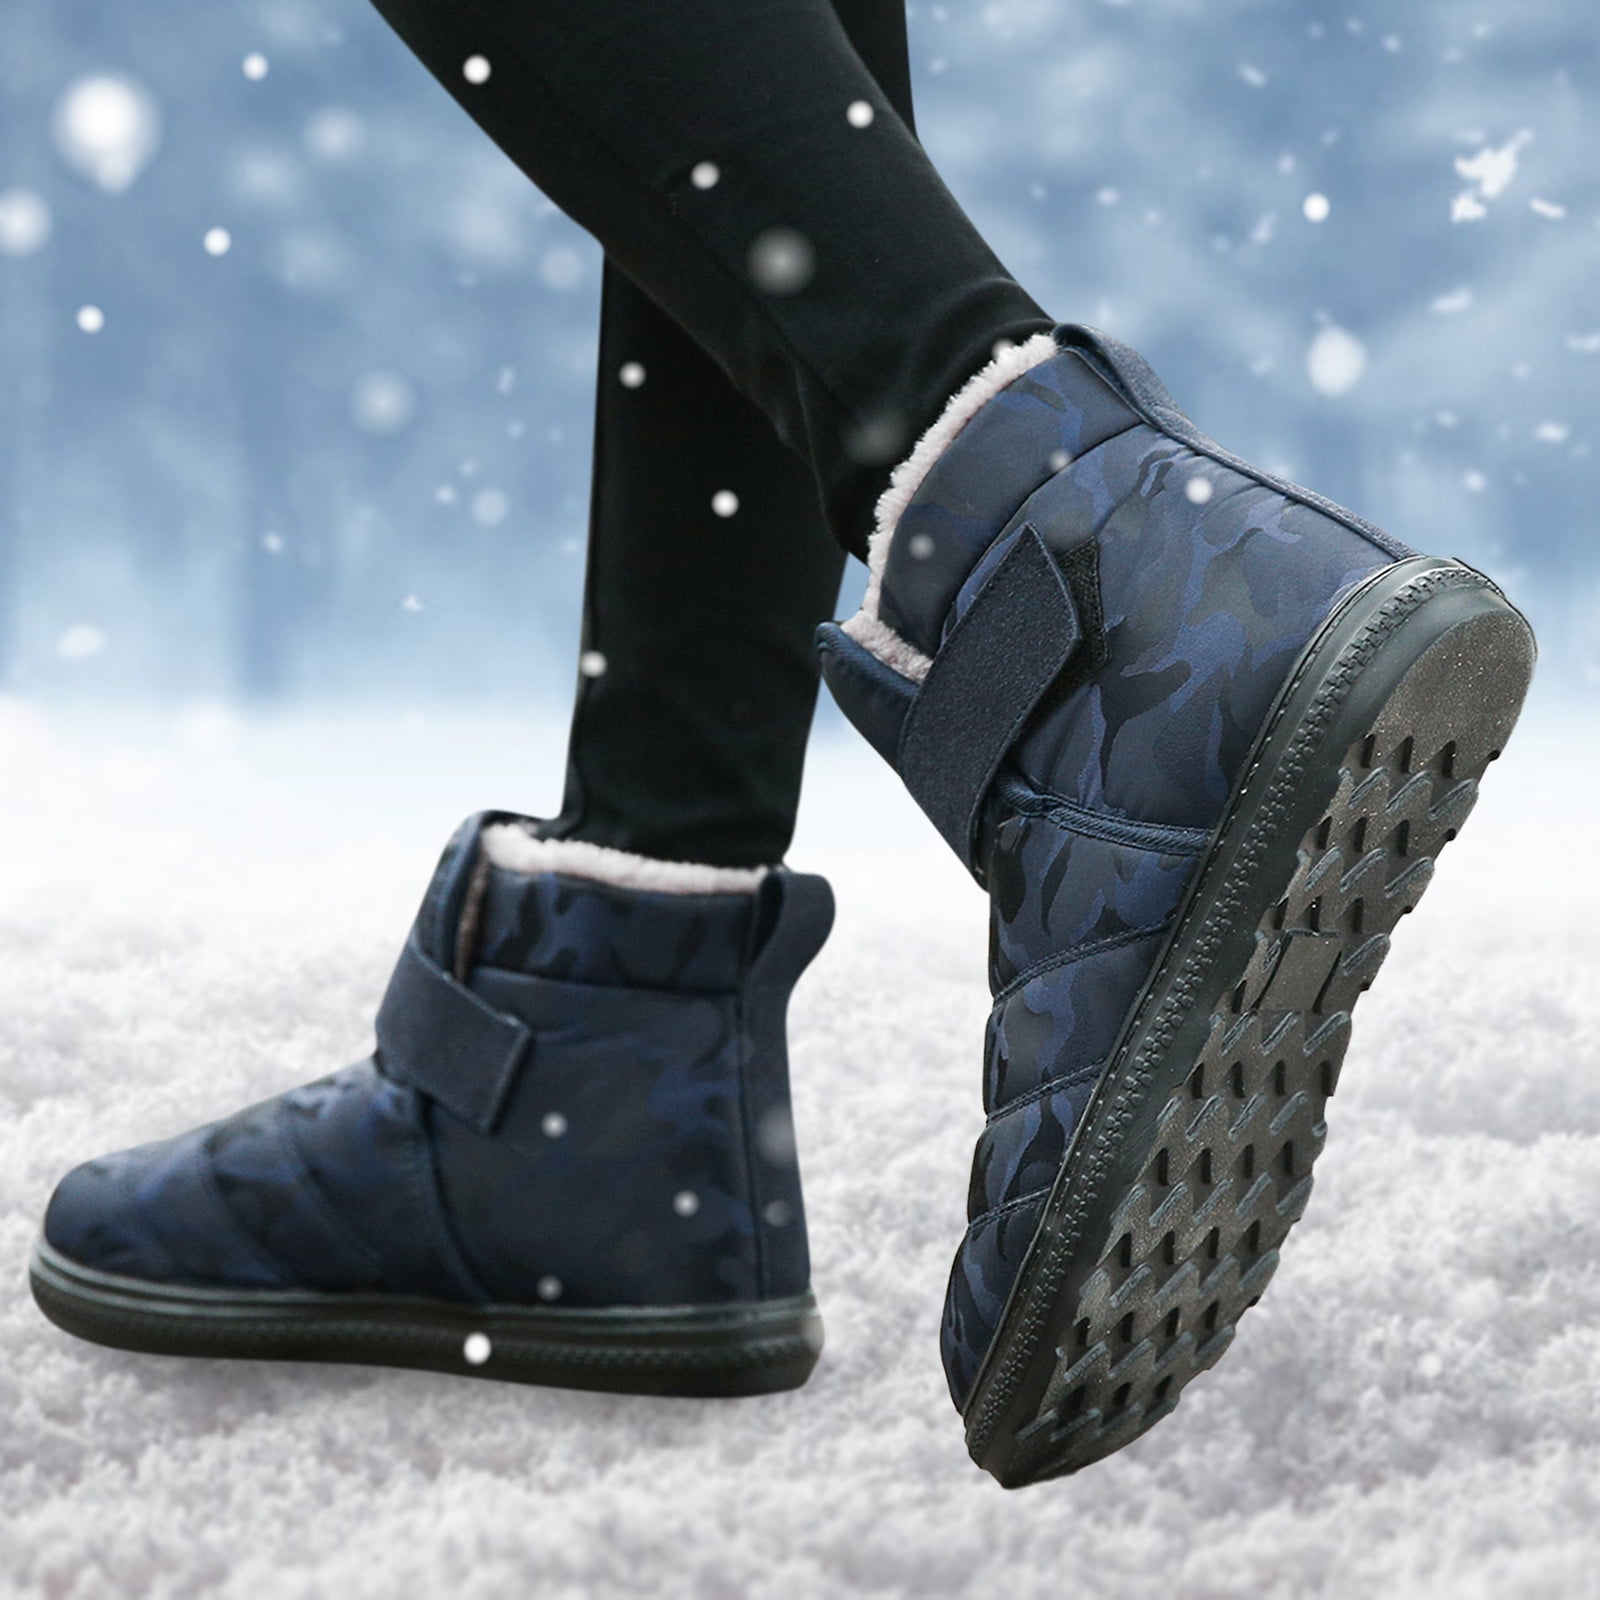 T-JULY Fashion Women Winter Snow Boots Solid Color Cotton Inside Antiskid Bottom Keep Warm Waterproof Shoes